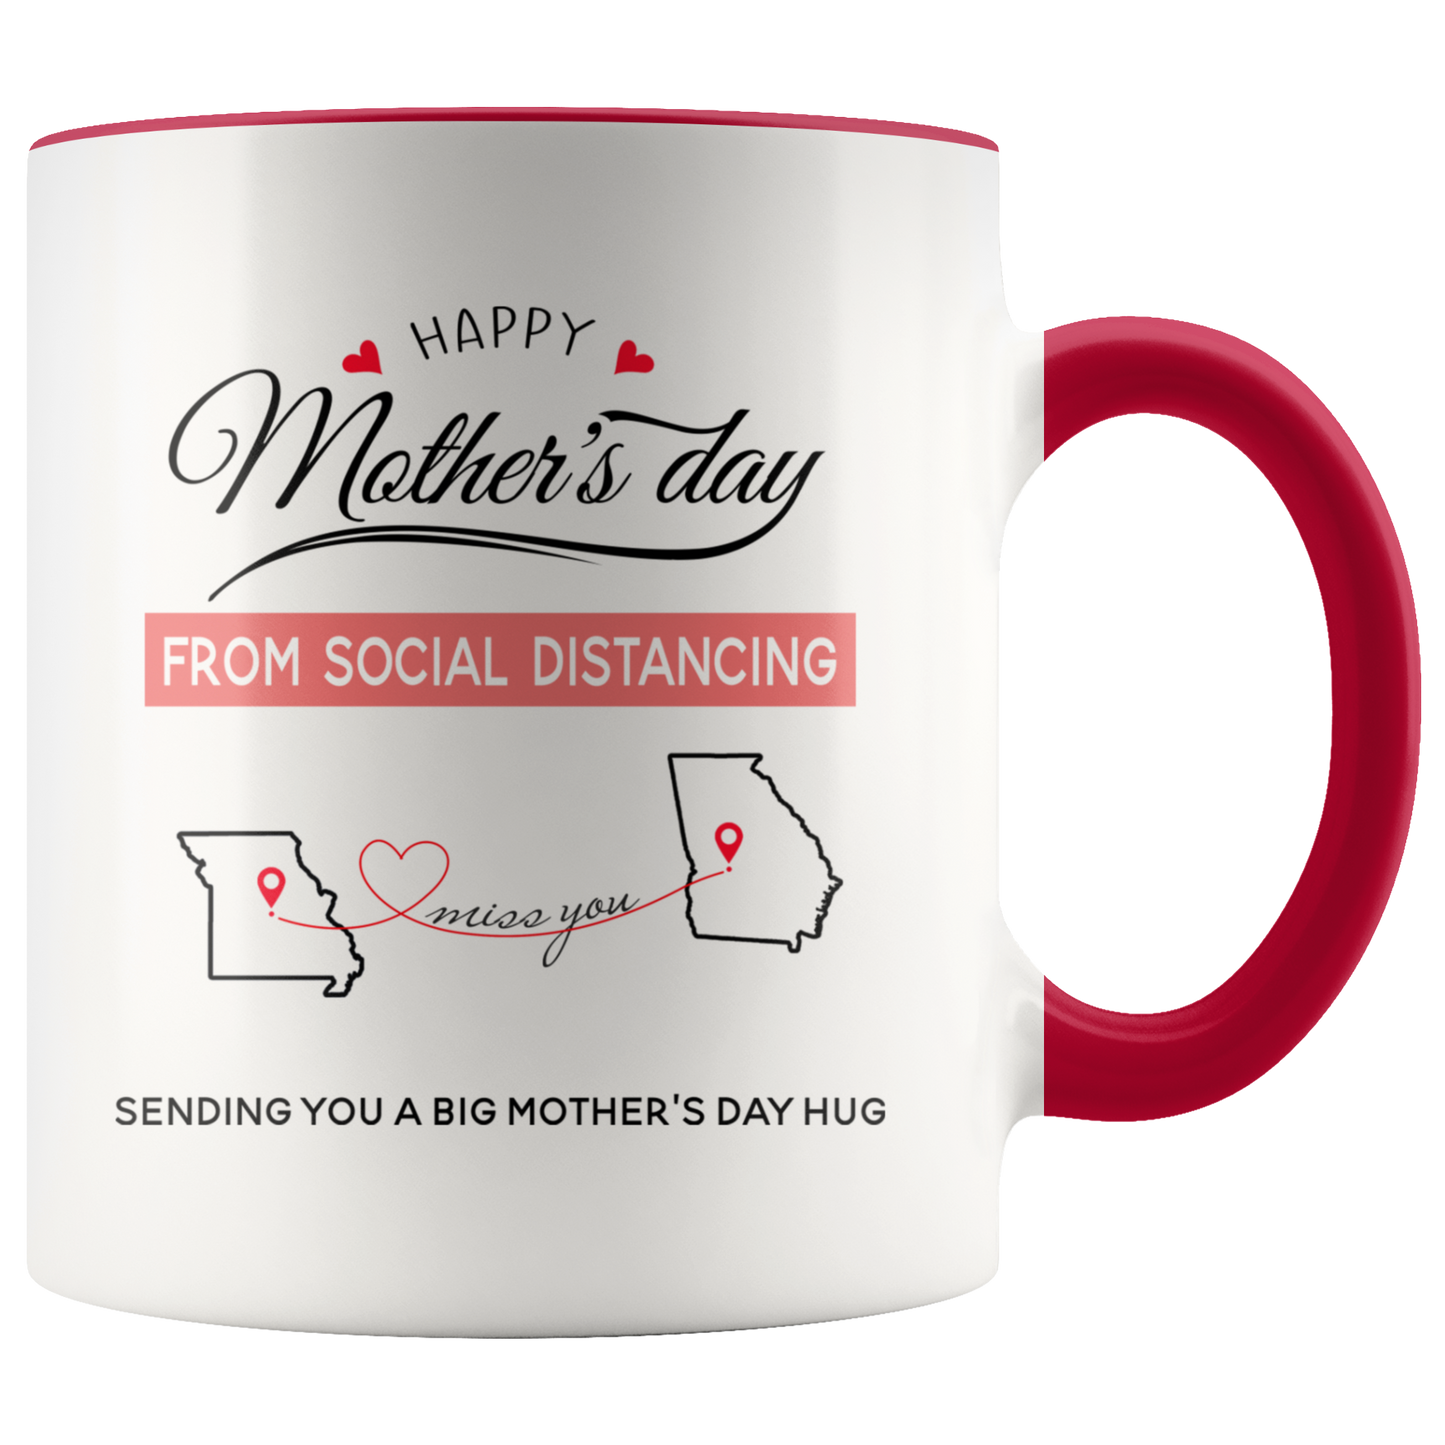 ND-21437118-sp-27690 - [ Missouri | Georgia ] (CC_Accent_Mug_) Happy Mothers Day From Social Distancing, Sending You A Big